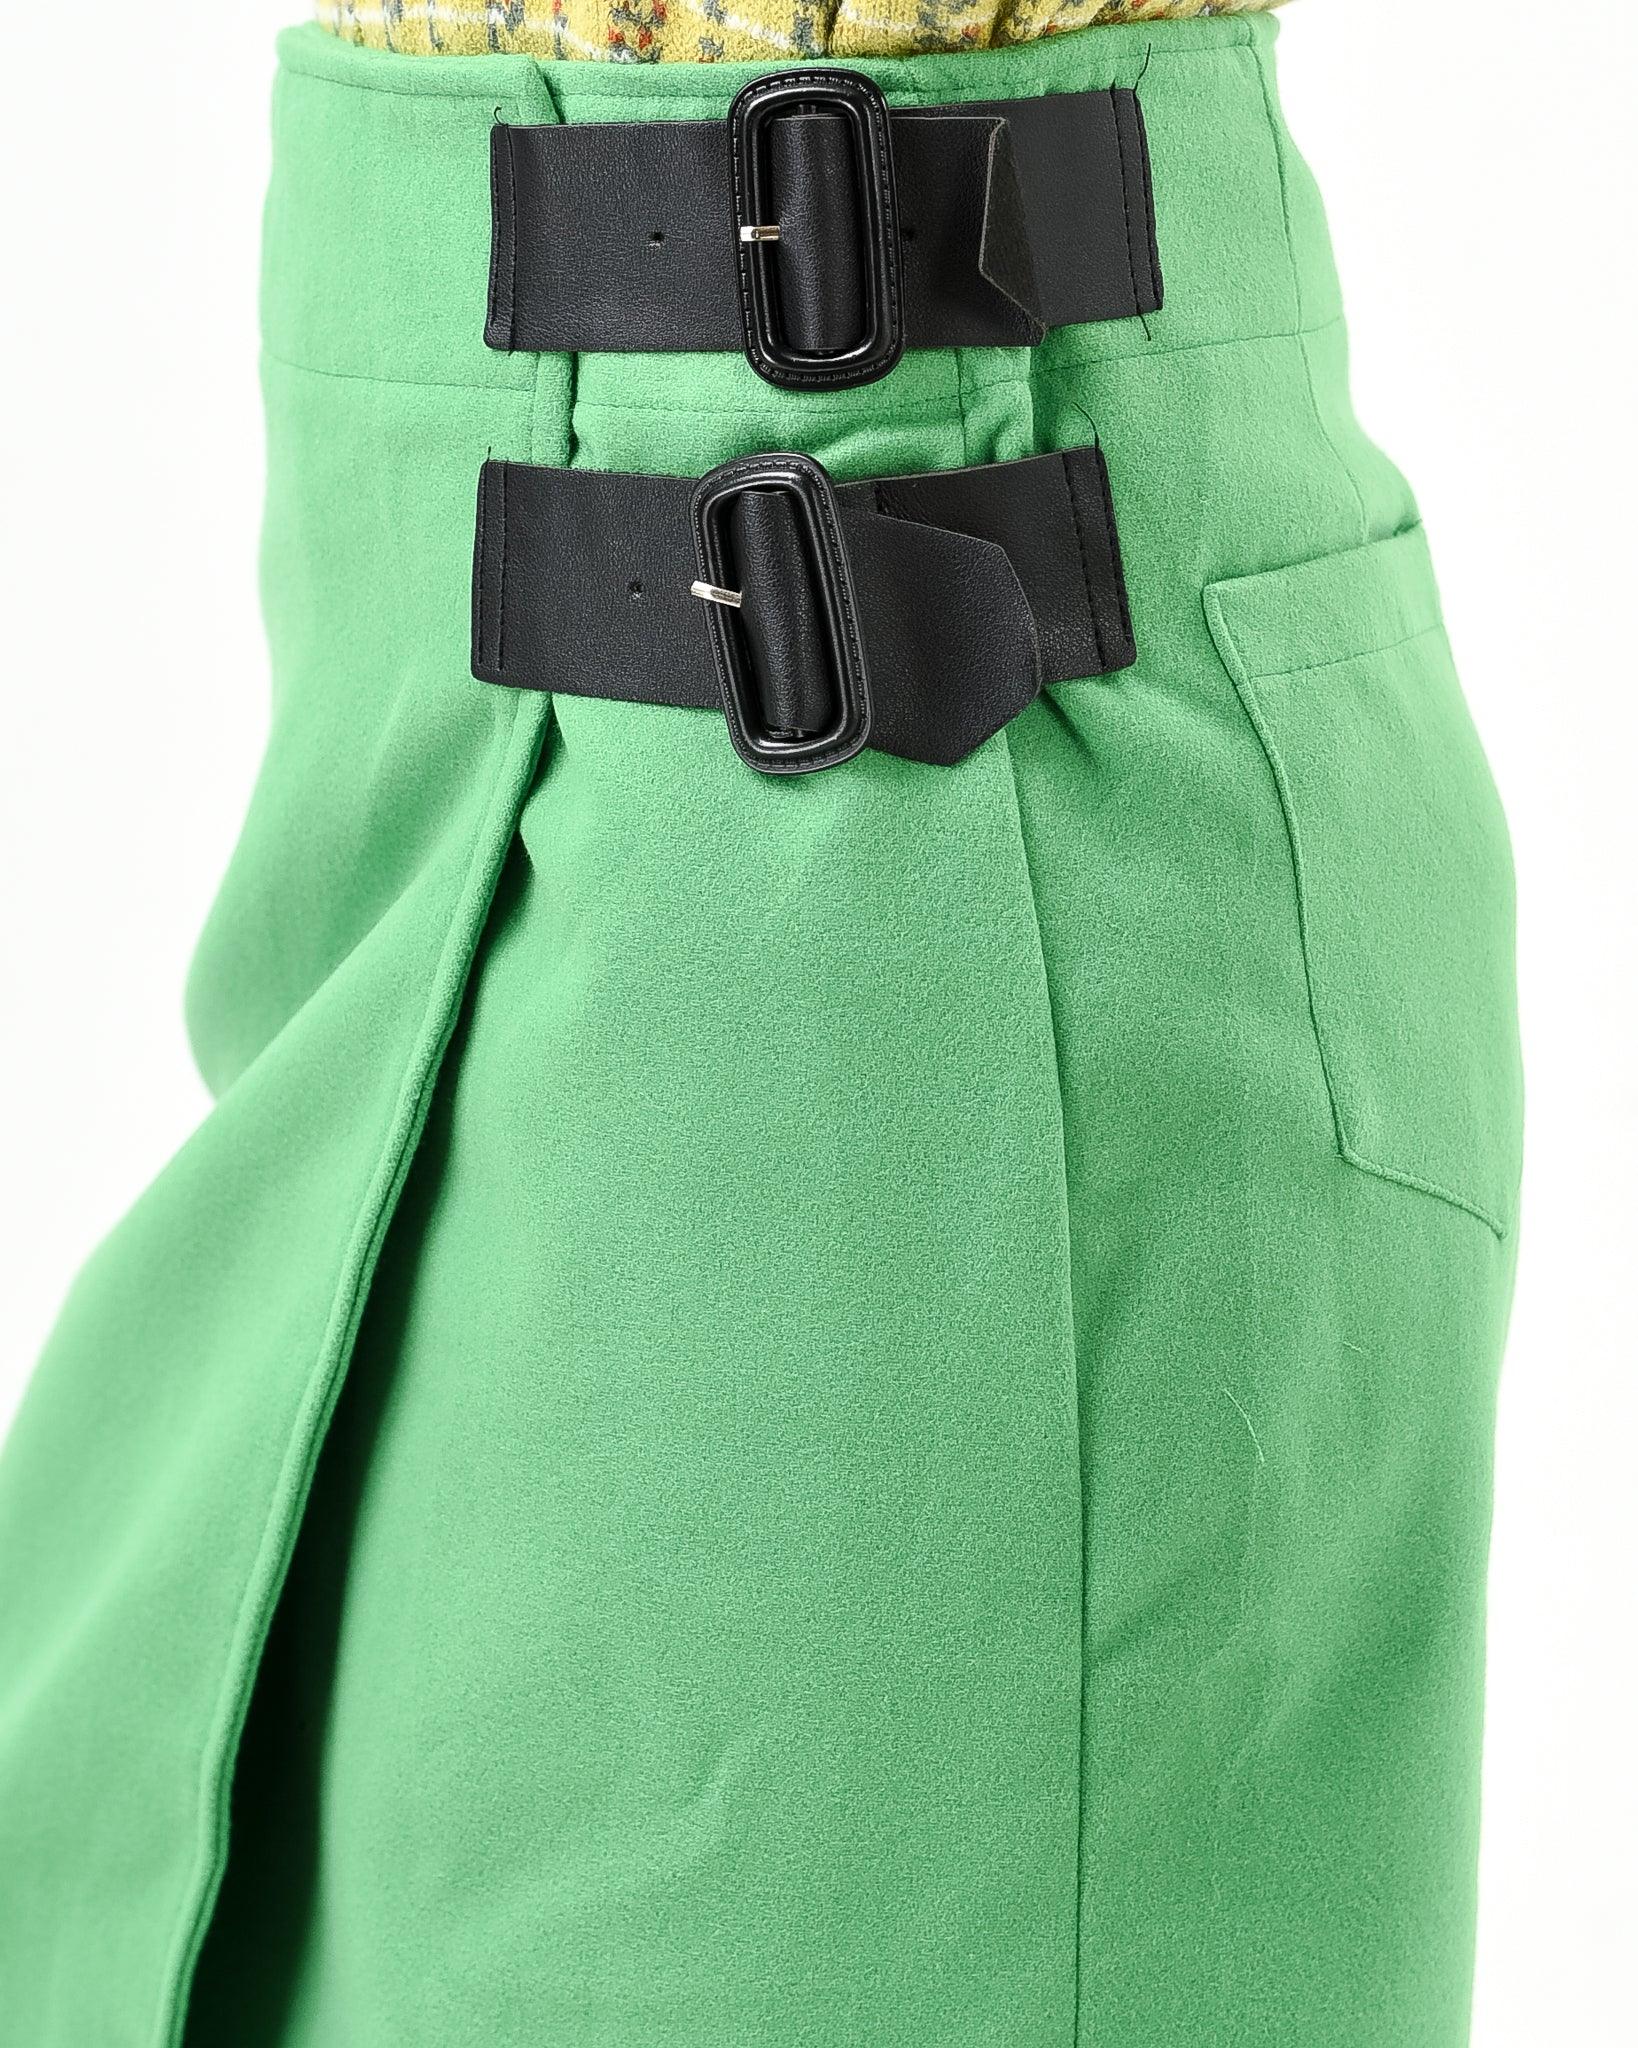 Winter Wrap Skirt With Buckle - XD21